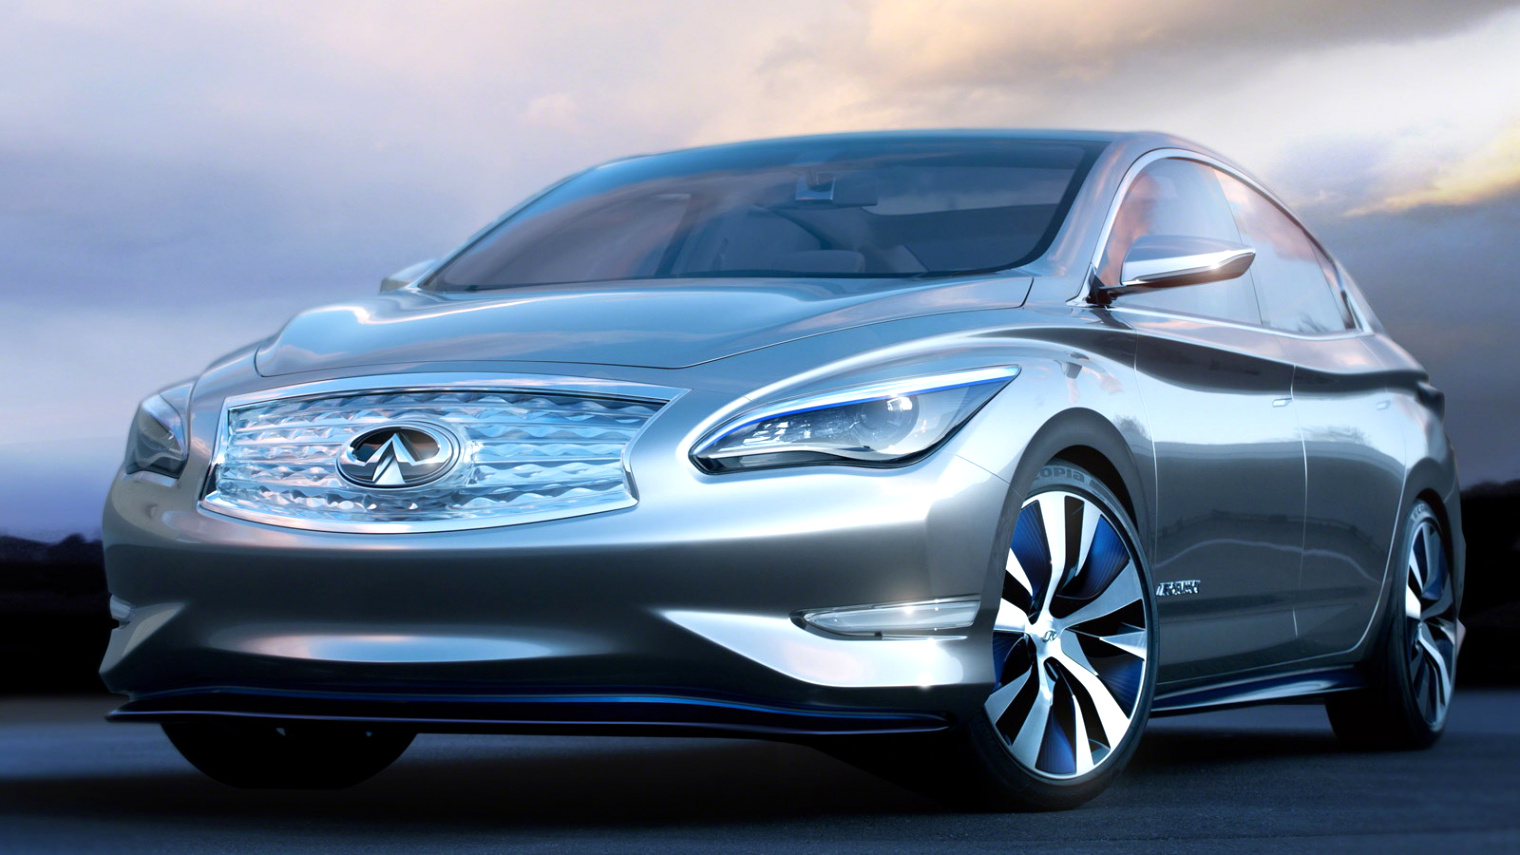 Car Rental software In assumption La Dans Infiniti Le Electric Luxury Sedan to Be Built after All, with ...